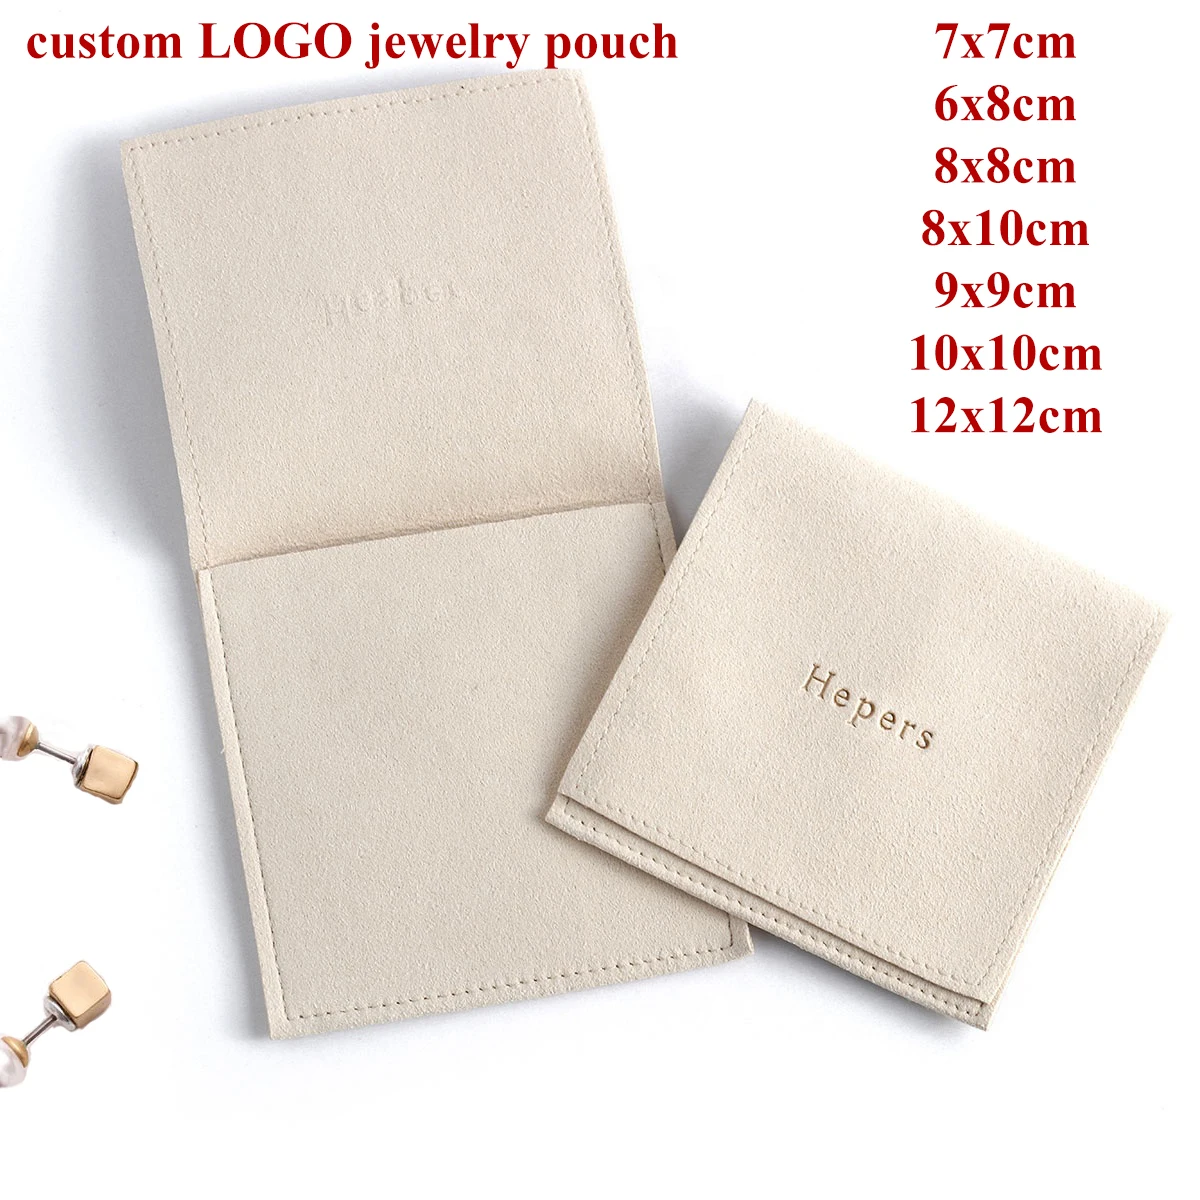 100pcs/Lot Custom Logo Jewelry Pouches Flap Small Bags Jewelries Case Earrings Ring Necklace Beige Pouch Business Logo Name Bag